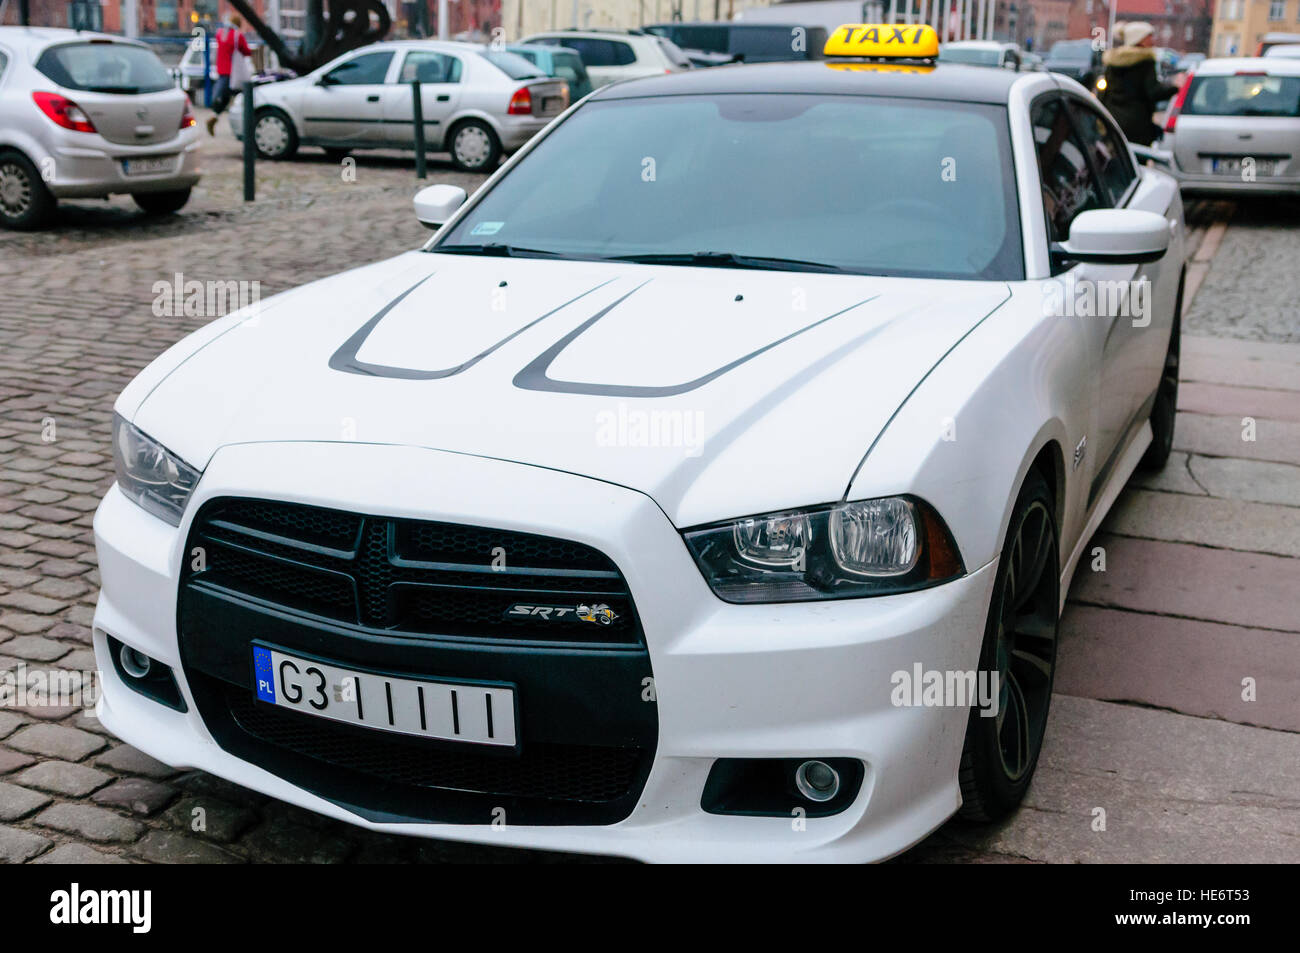 Dodge Charger SRT being used as a taxi in Gdansk, Poland. Stock Photo